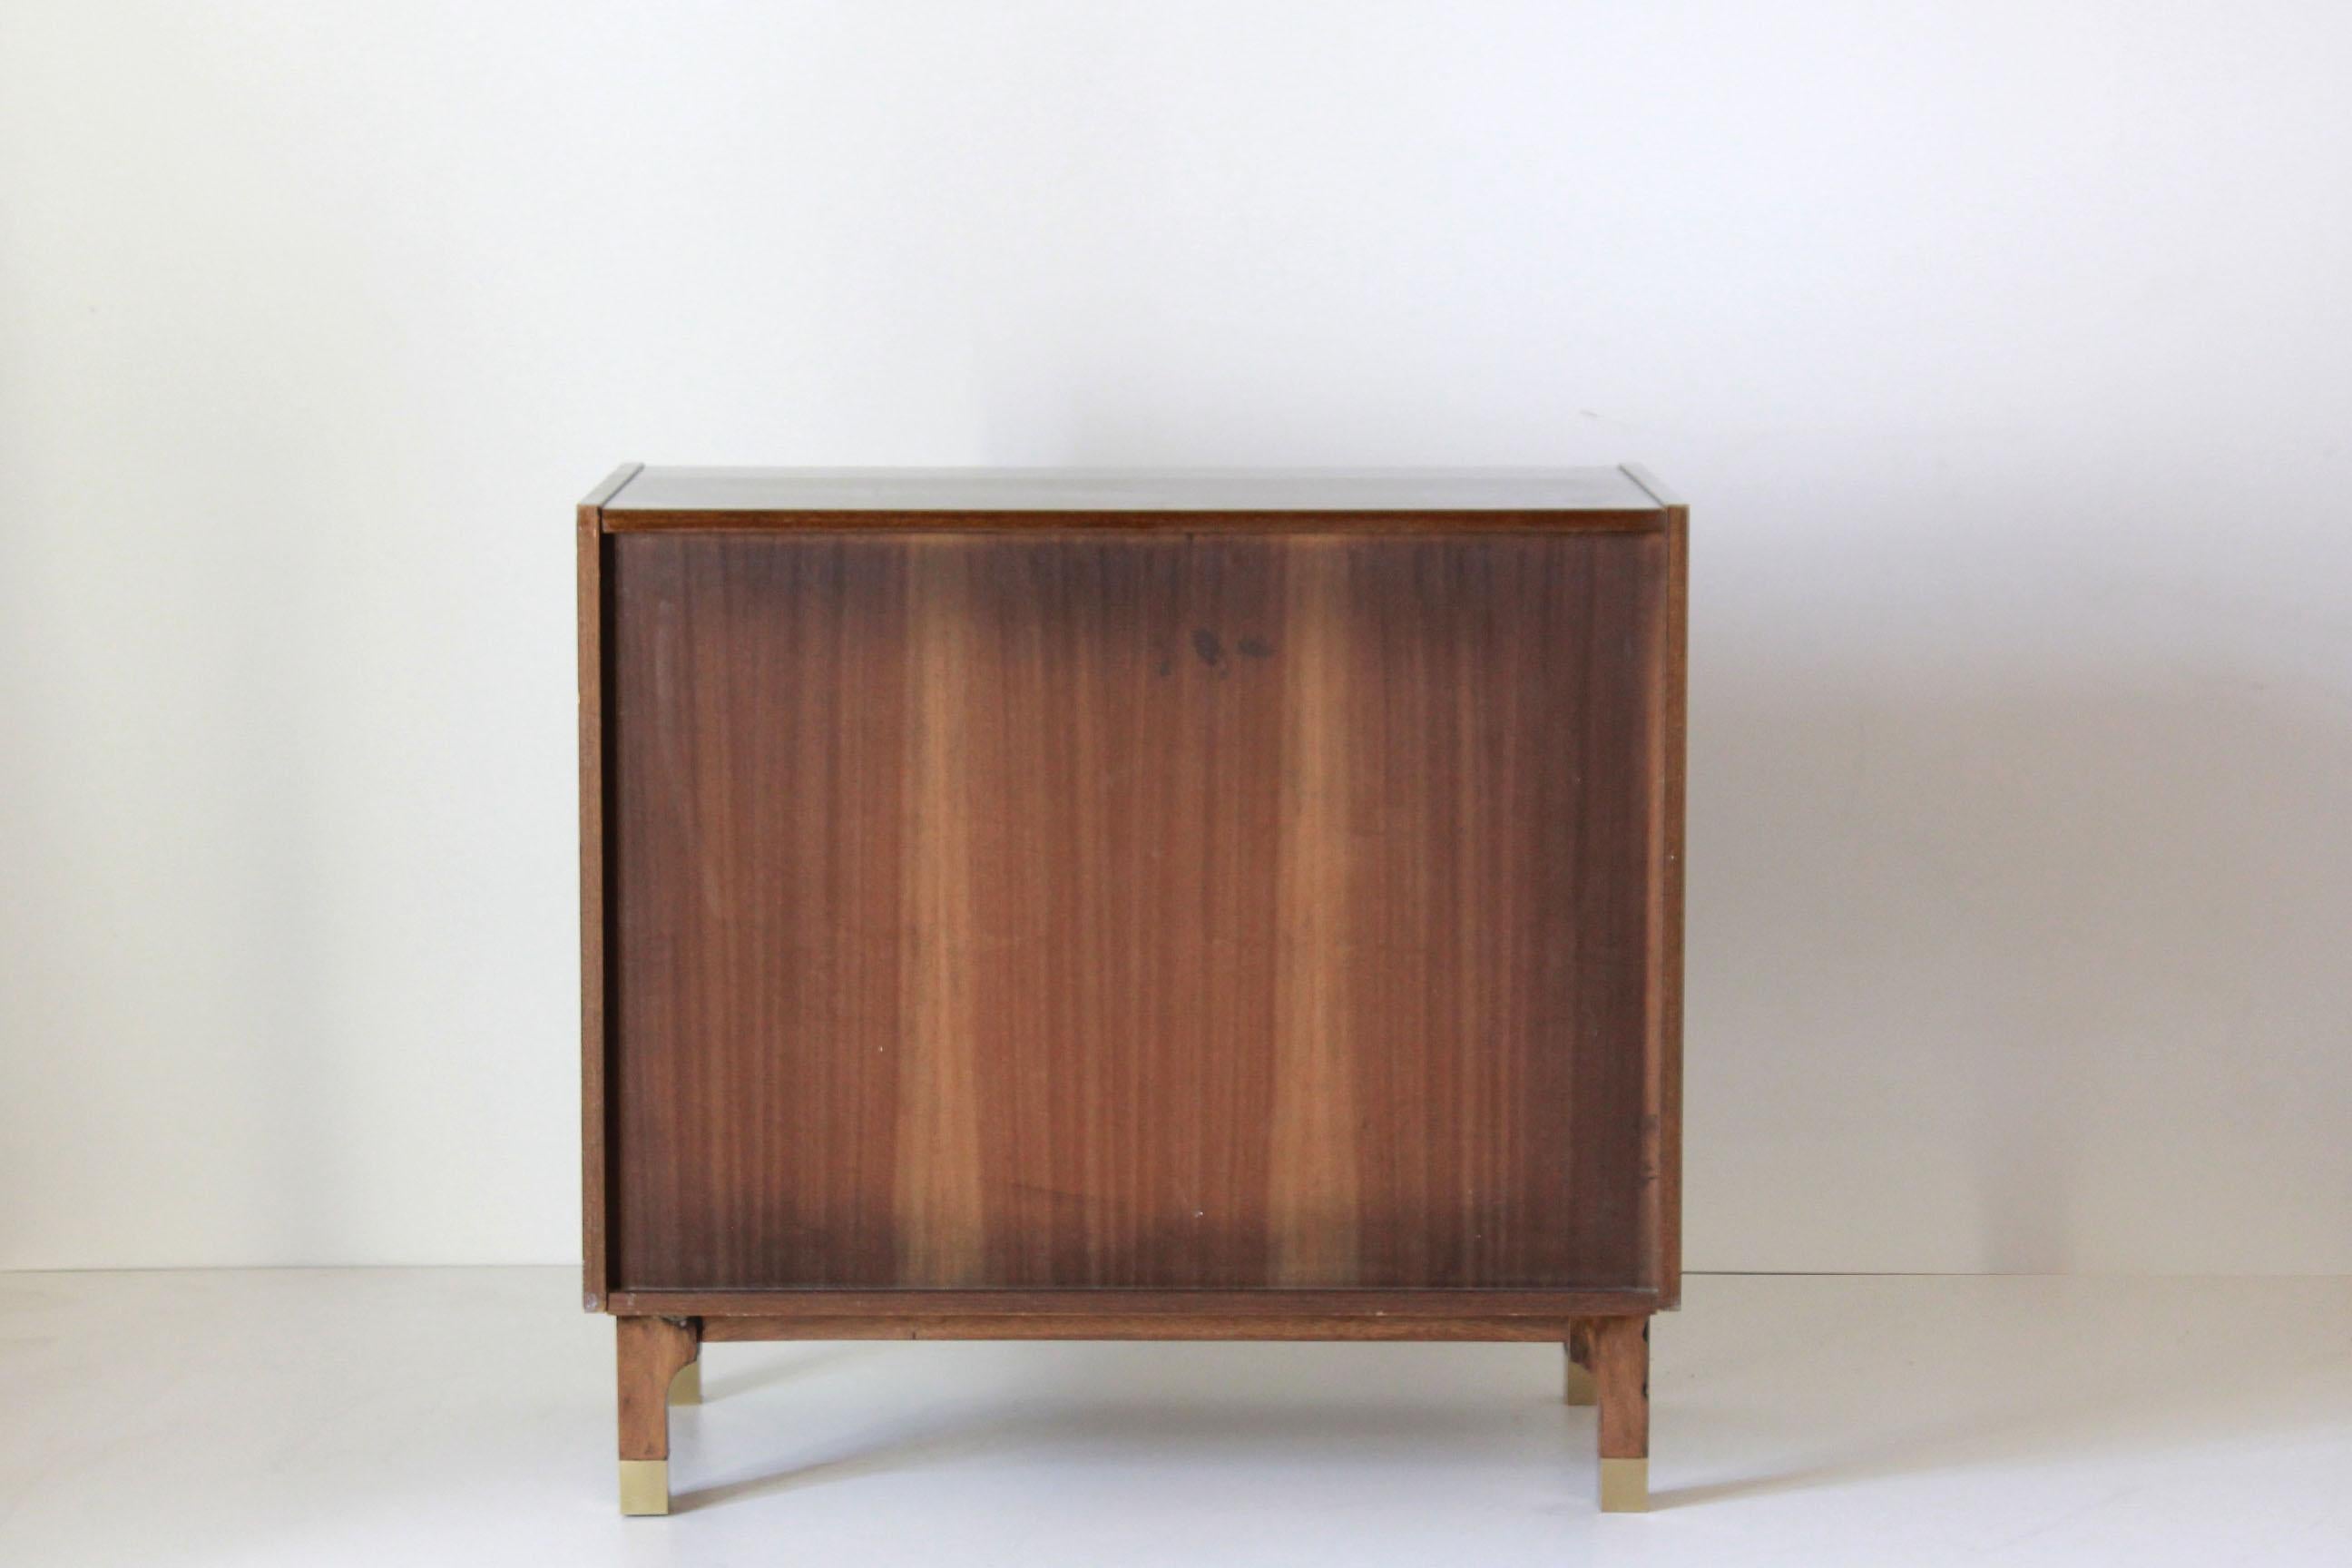 A 1950s small vintage sideboard. Veereed finishing with brass handles. In really good conditions with only some signs of time. All parts are the original ones. Typical midcentury modern Italian style.